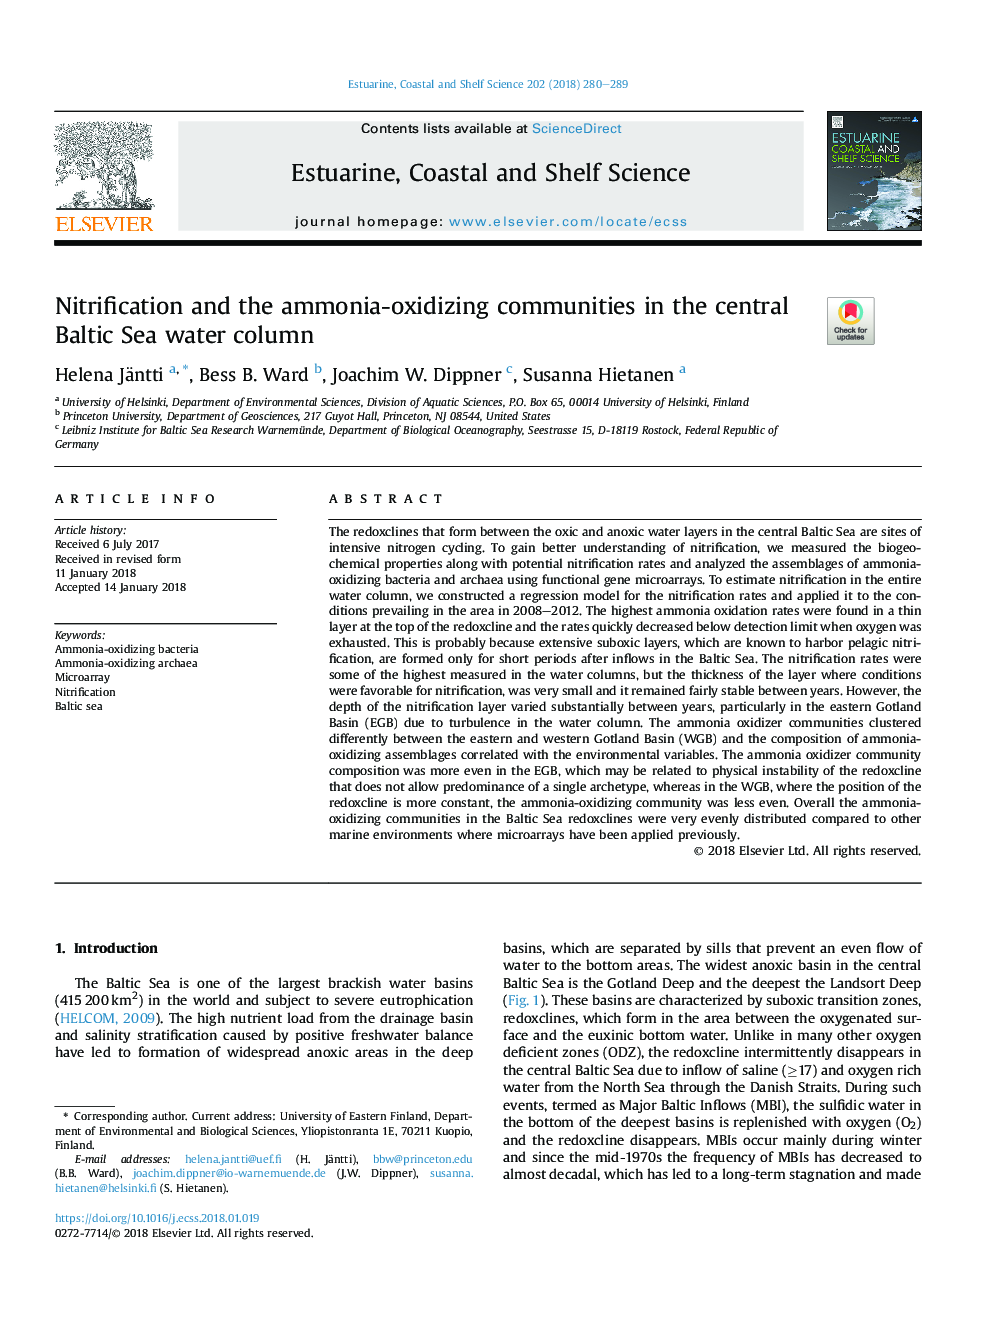 Nitrification and the ammonia-oxidizing communities in the central Baltic Sea water column